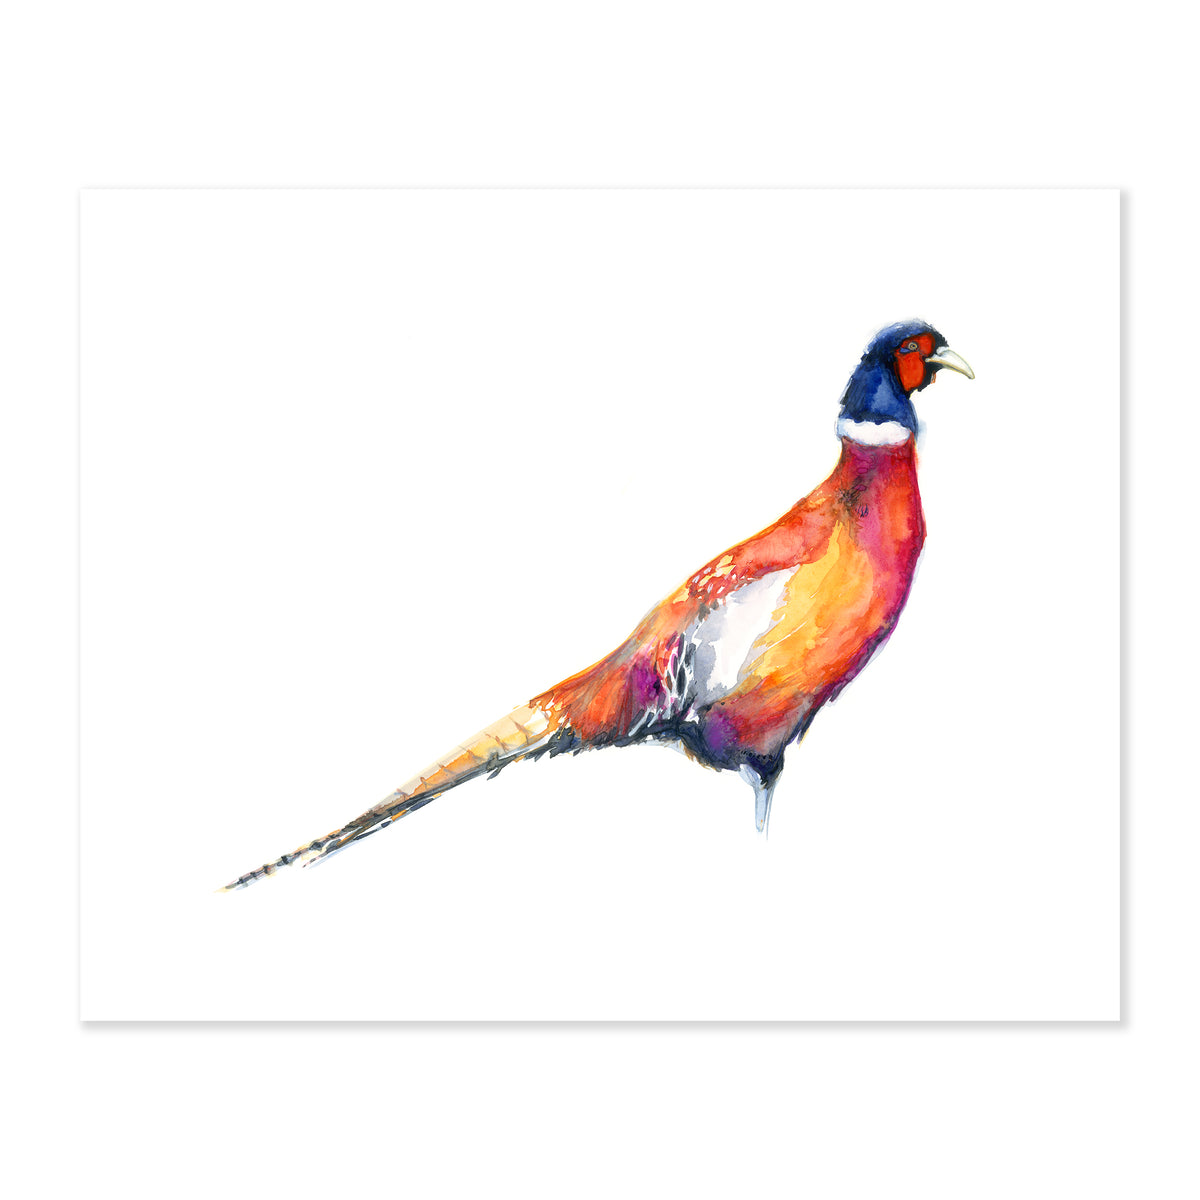 A fine art print illustrating the profile of an orange pheasant painted using watercolors on a soft white background